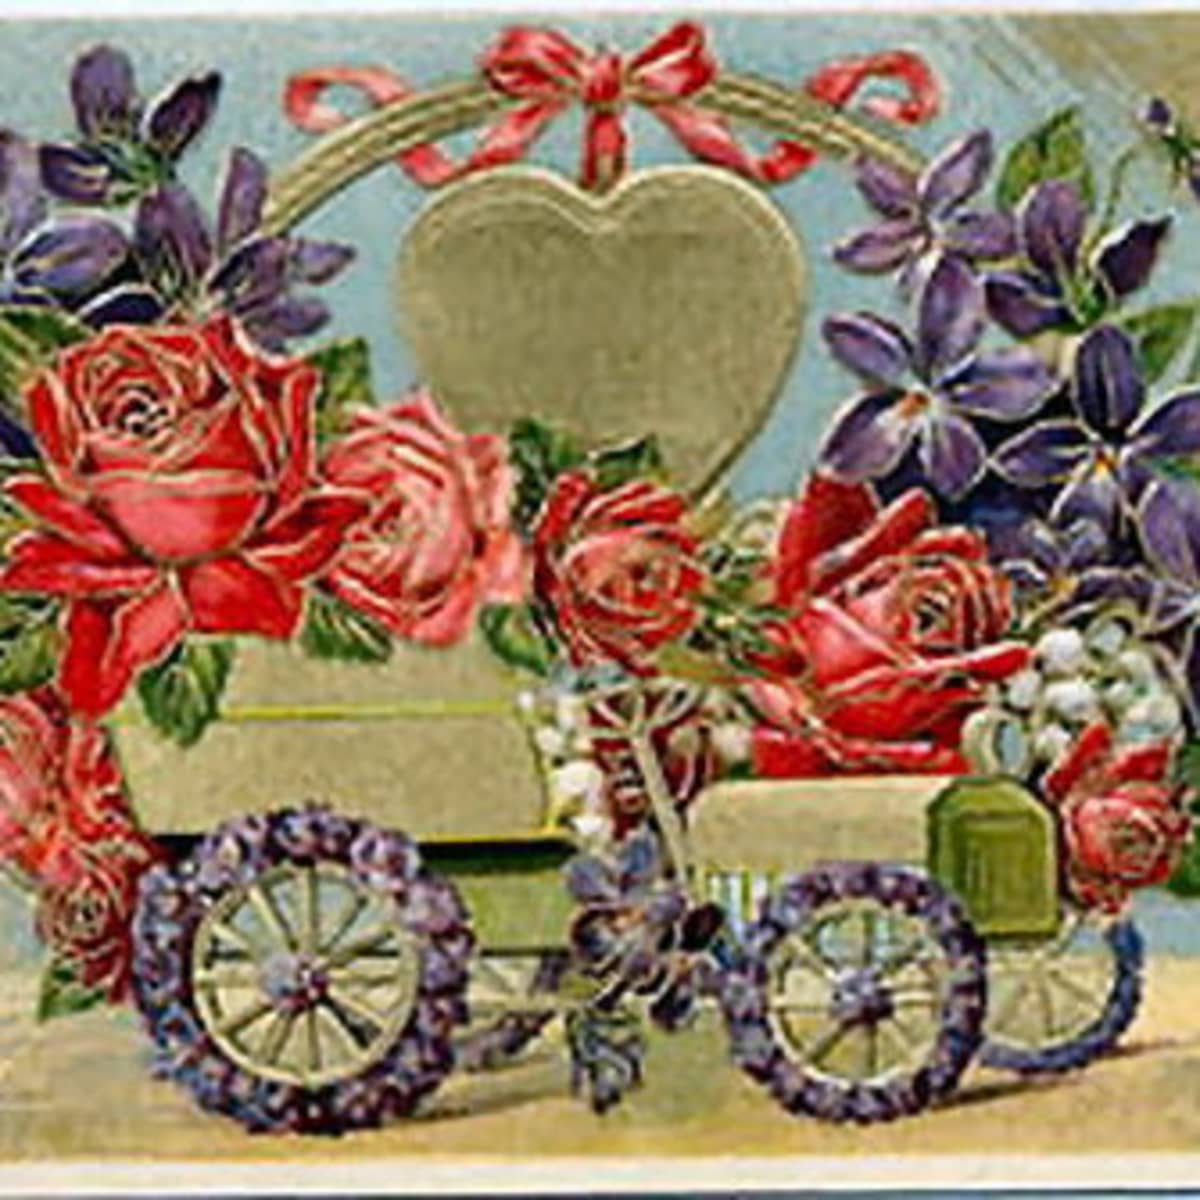 Retro valentine card or postcard with red heart and roses